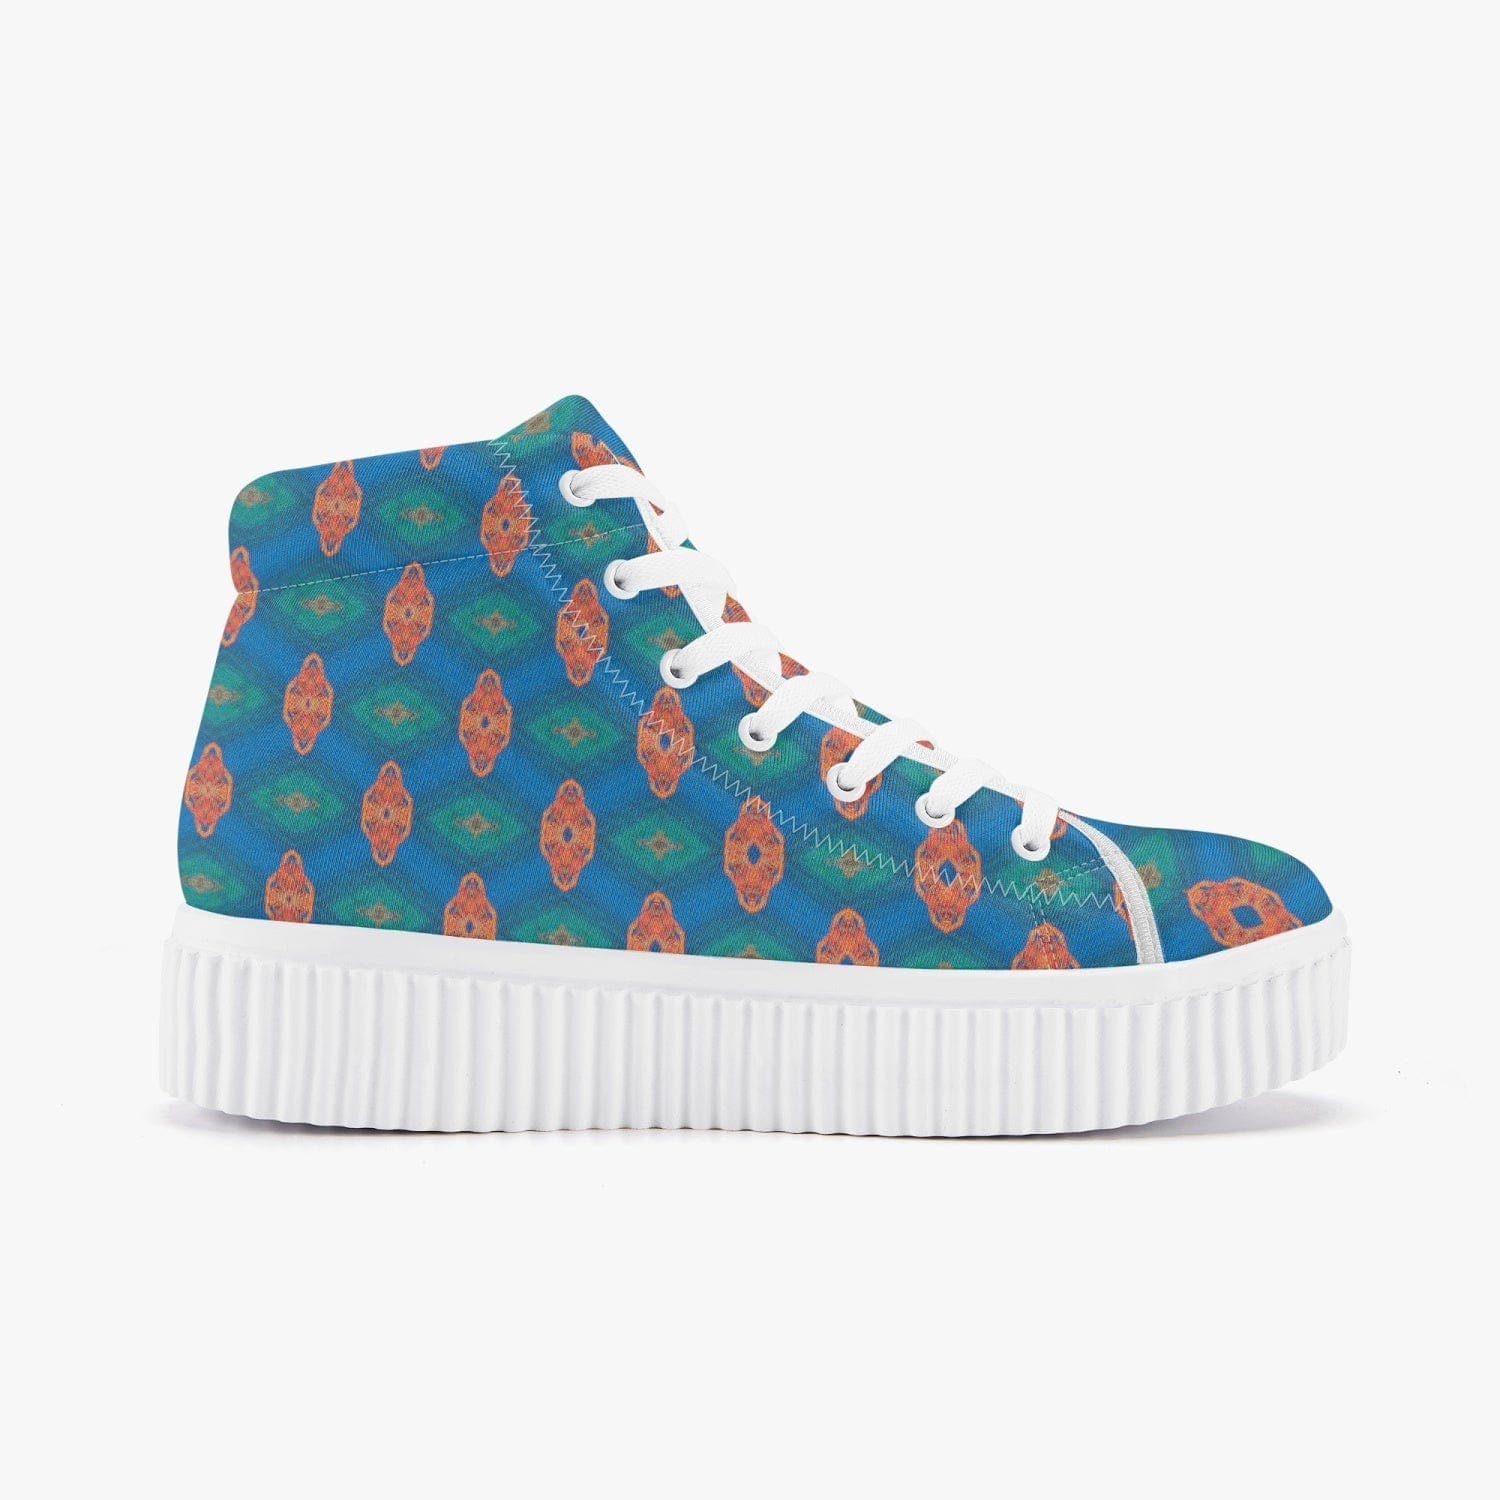 Holiday at the lake,  Women’s High Top Hot Trendy Platform Sneakers, designed by Sensus Studio Design